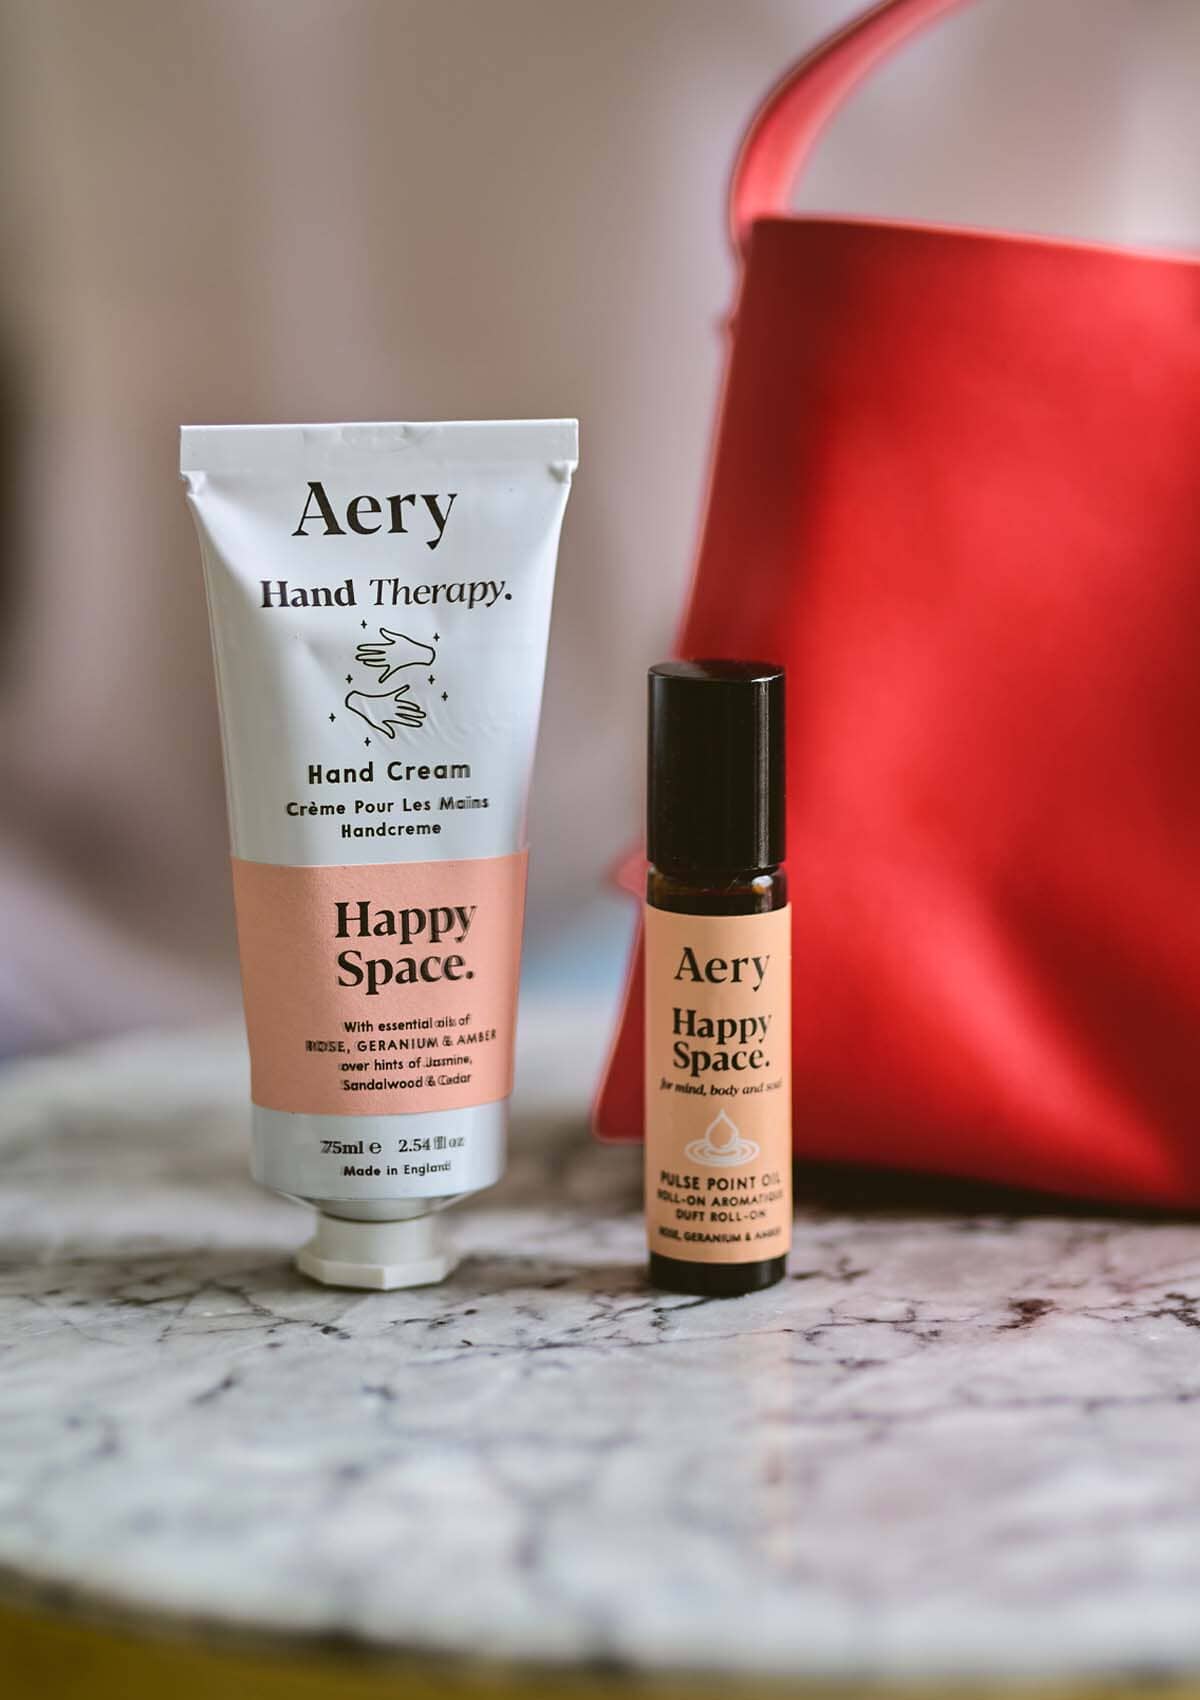 Pink Happy Space pulse point oil and Happy Space hand cream by Aery in front of red hand bag 